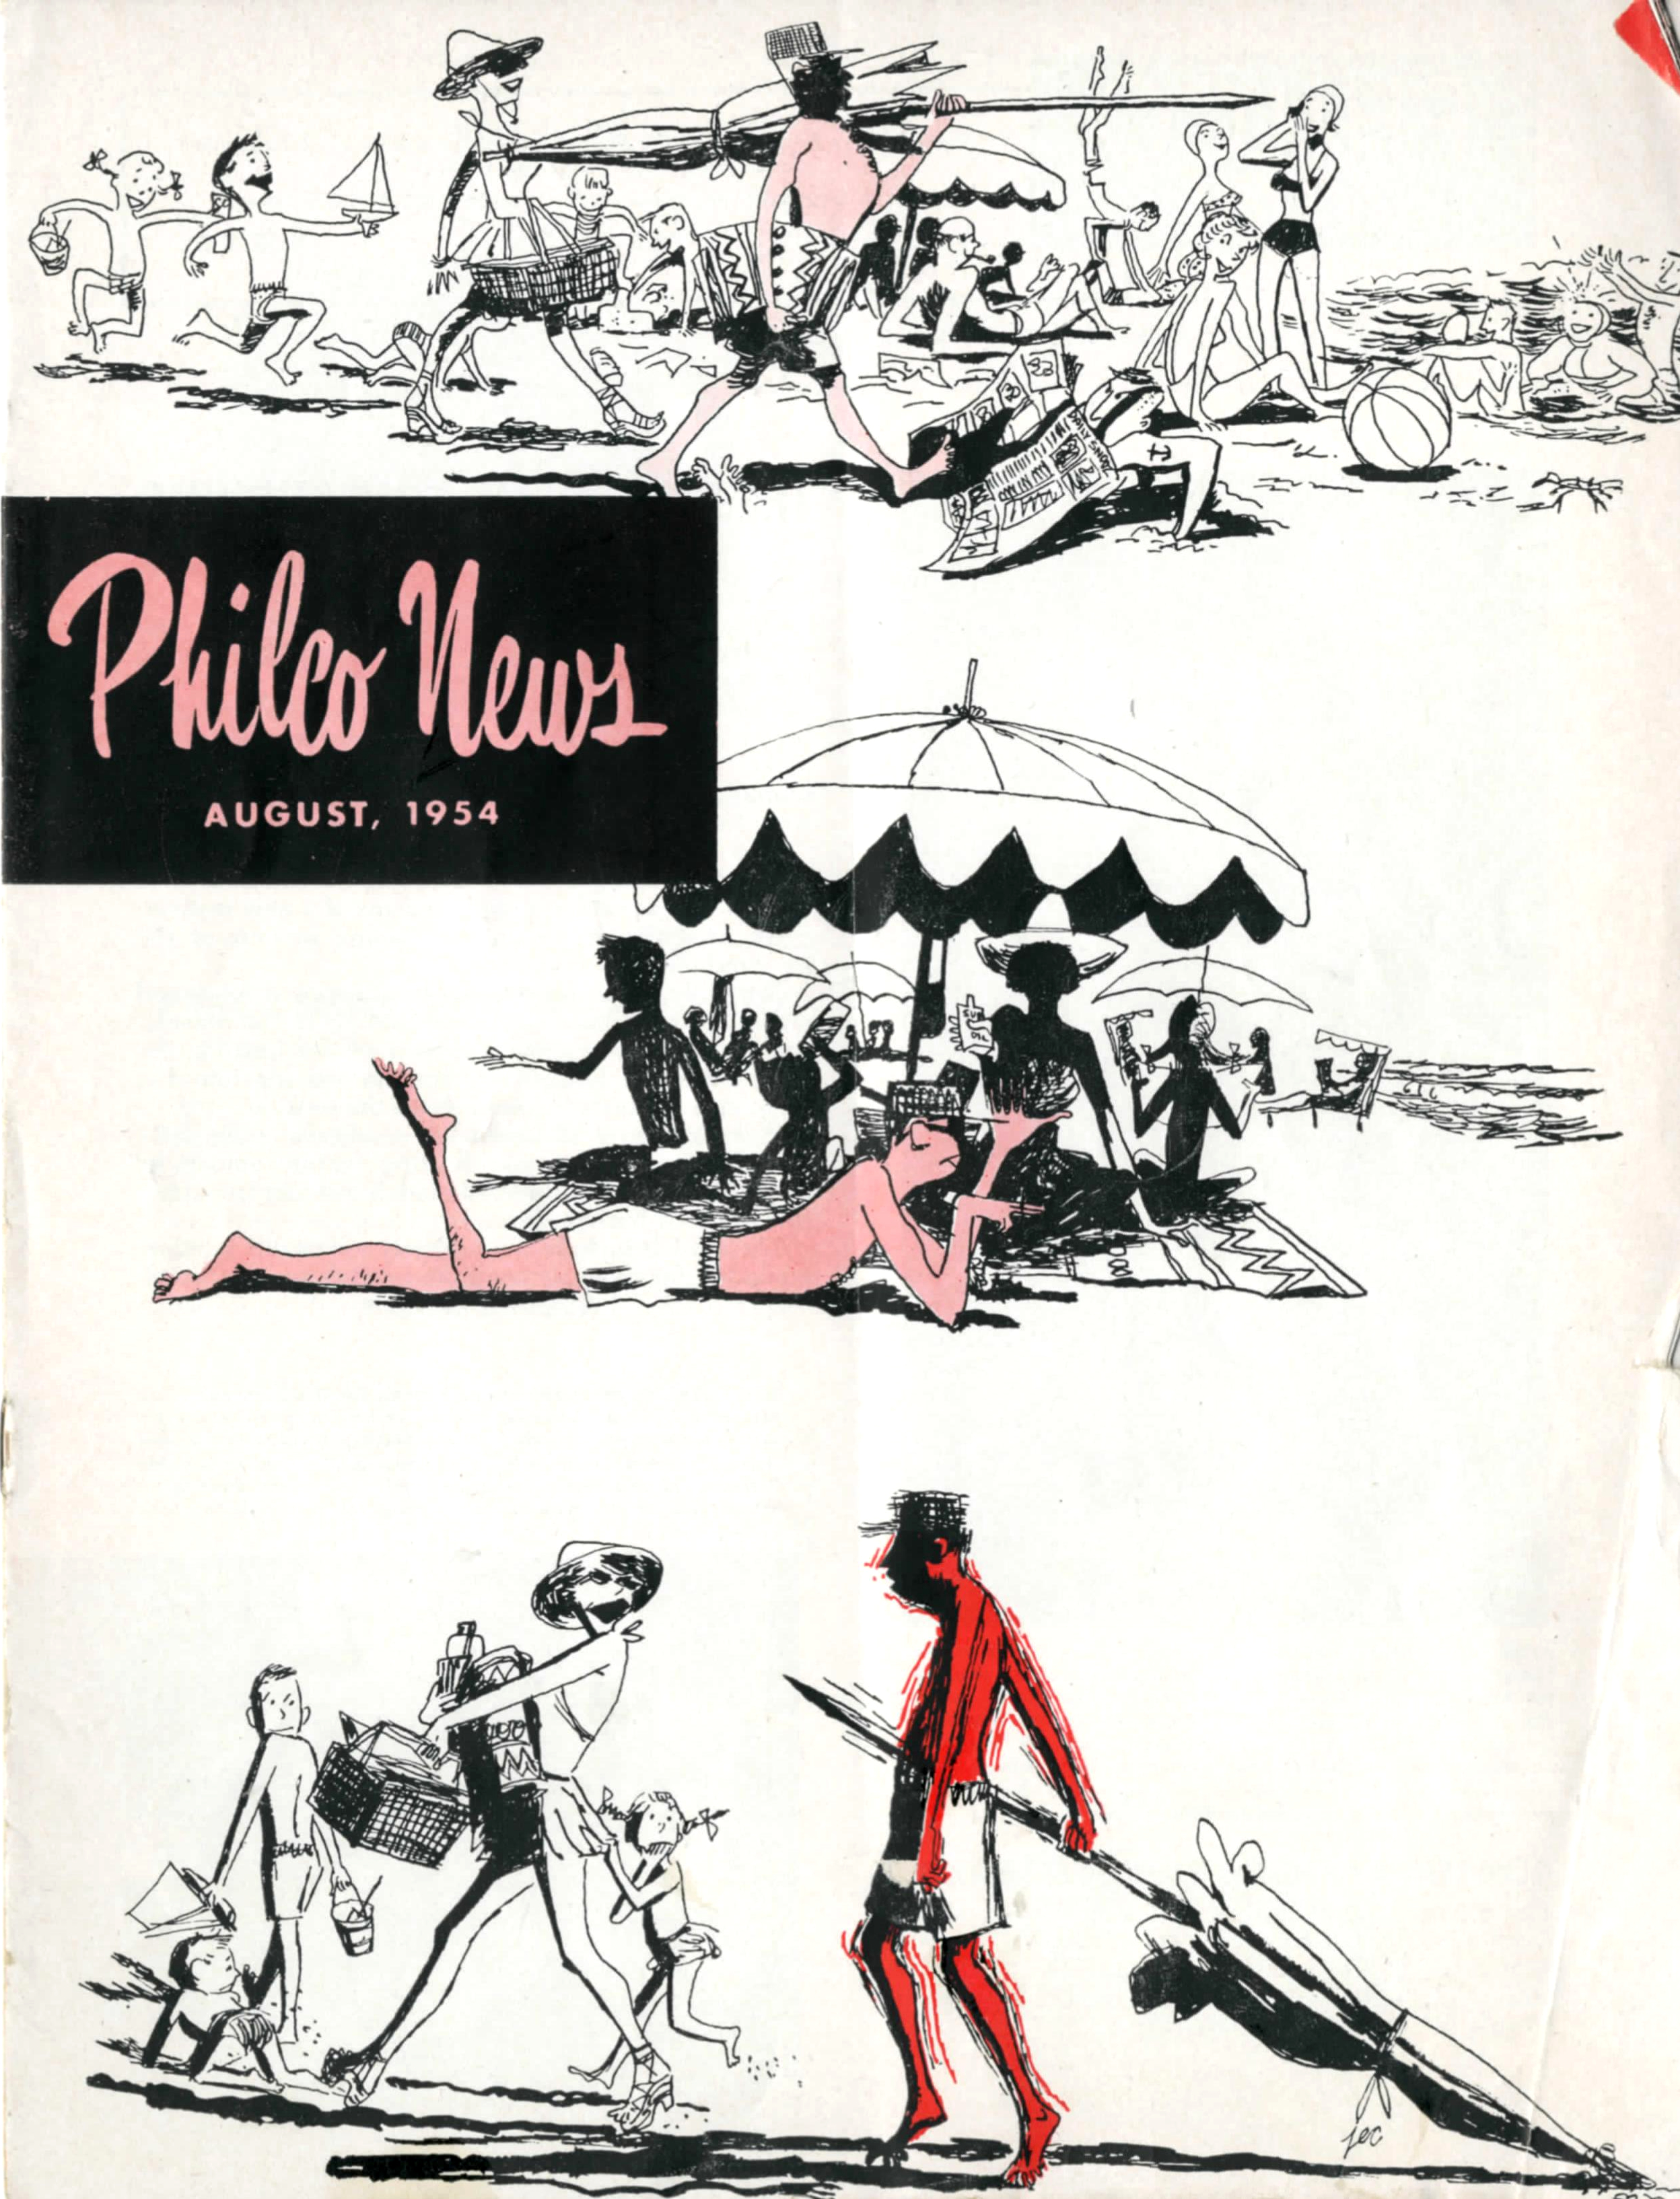 August 1954 cover of Philco News magazine. Partial color illustrations show a family arriving at, enjoying, and leaving a beach, with the father figure getting progressively more sunburned.